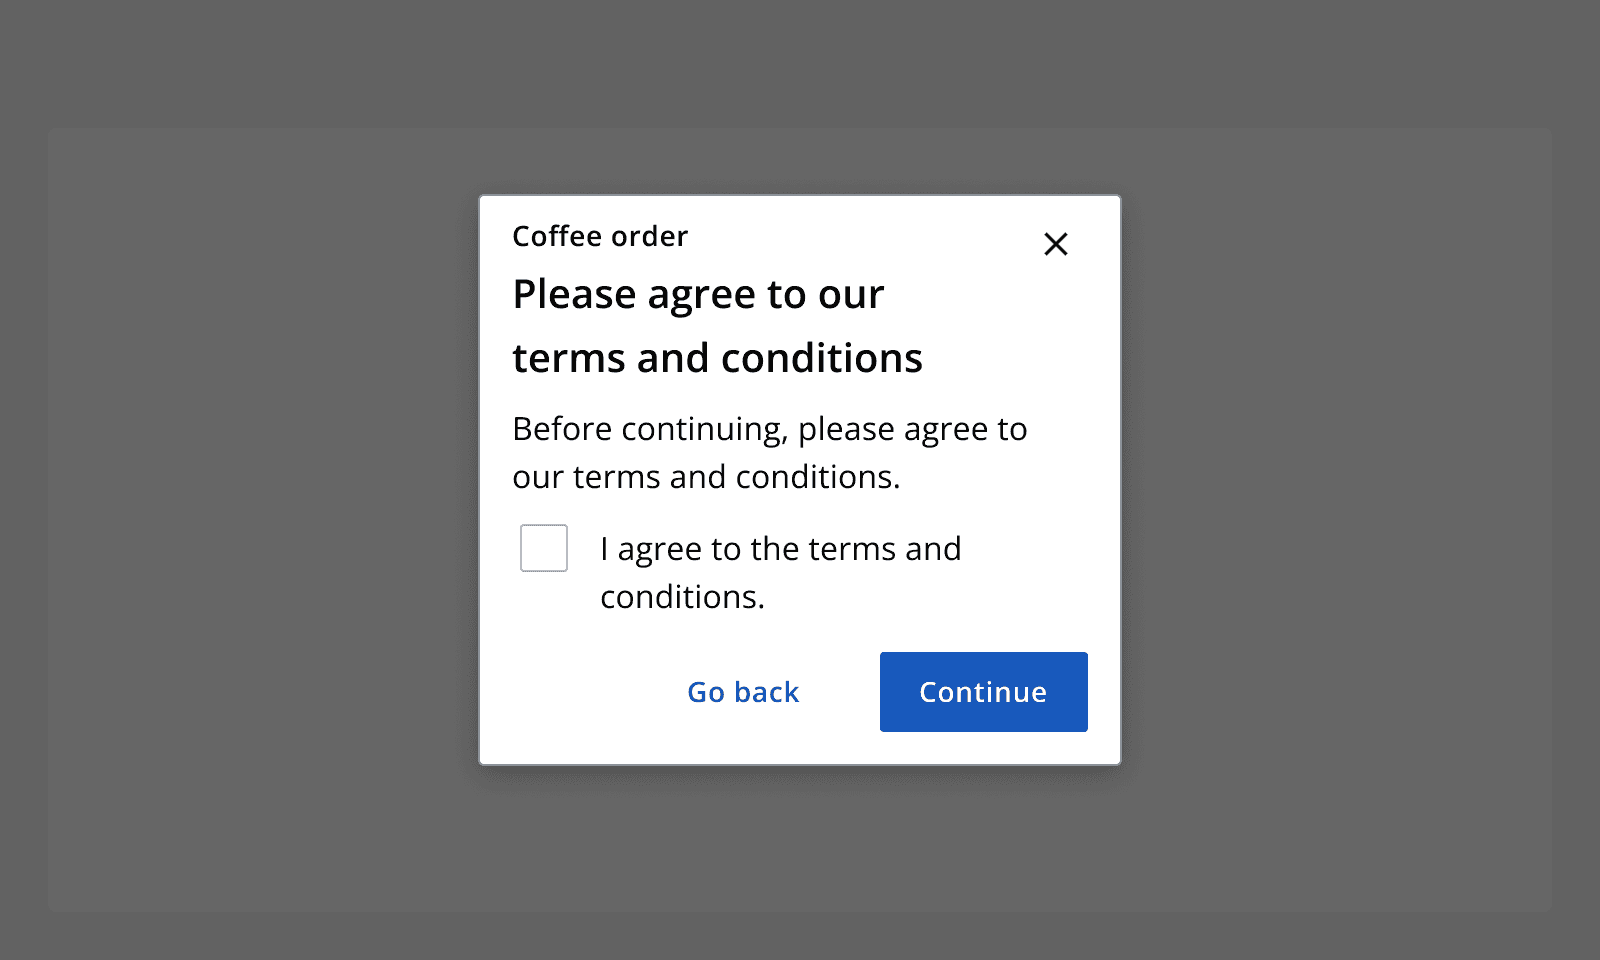 An example dialog for a coffee order that says 'Please agree to our terms and conditions.' The dialog has a checkbox in its content that allows the user to signify agreement. There are two buttons for 'continue' and 'go back'.